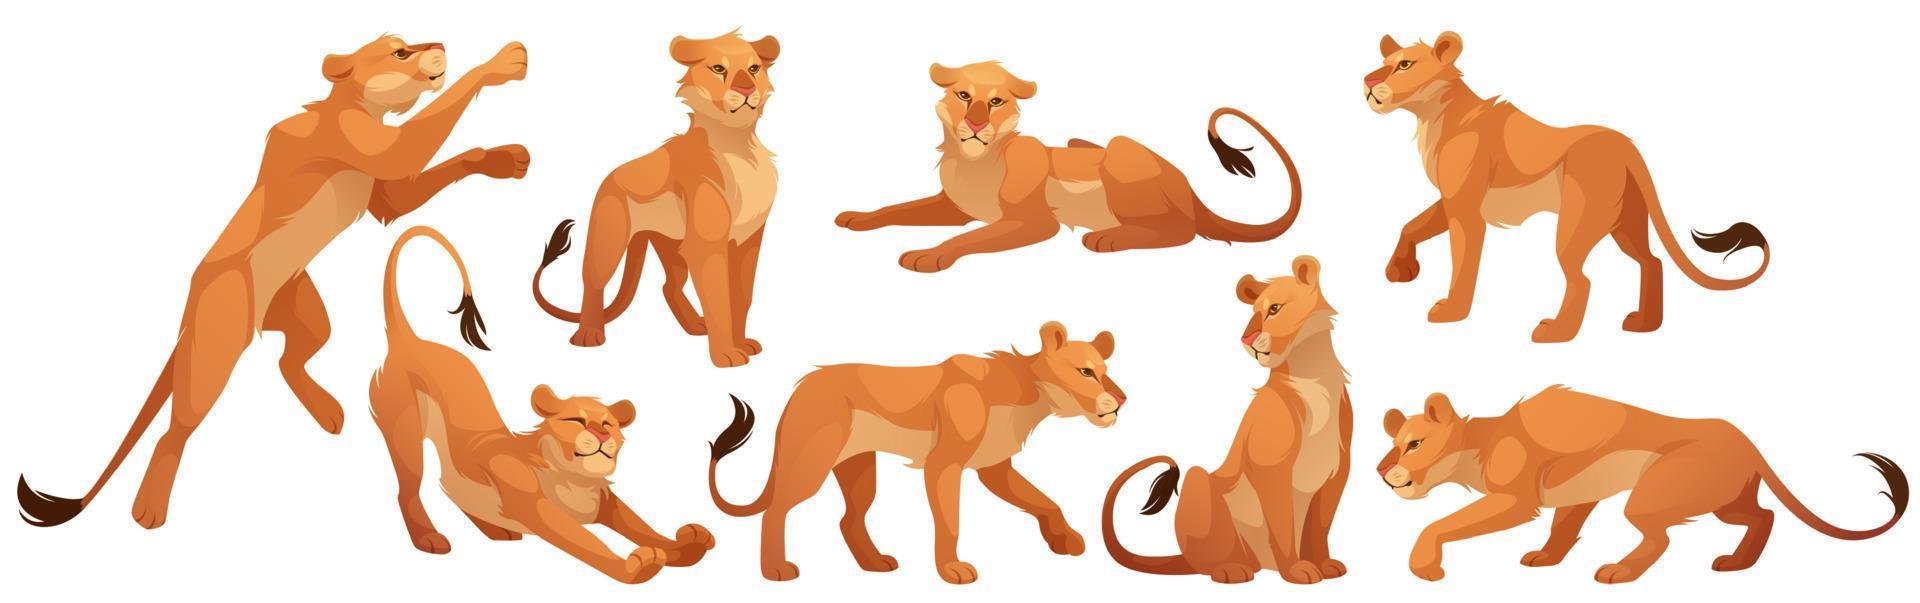 Lioness character, wild cat in different poses vector